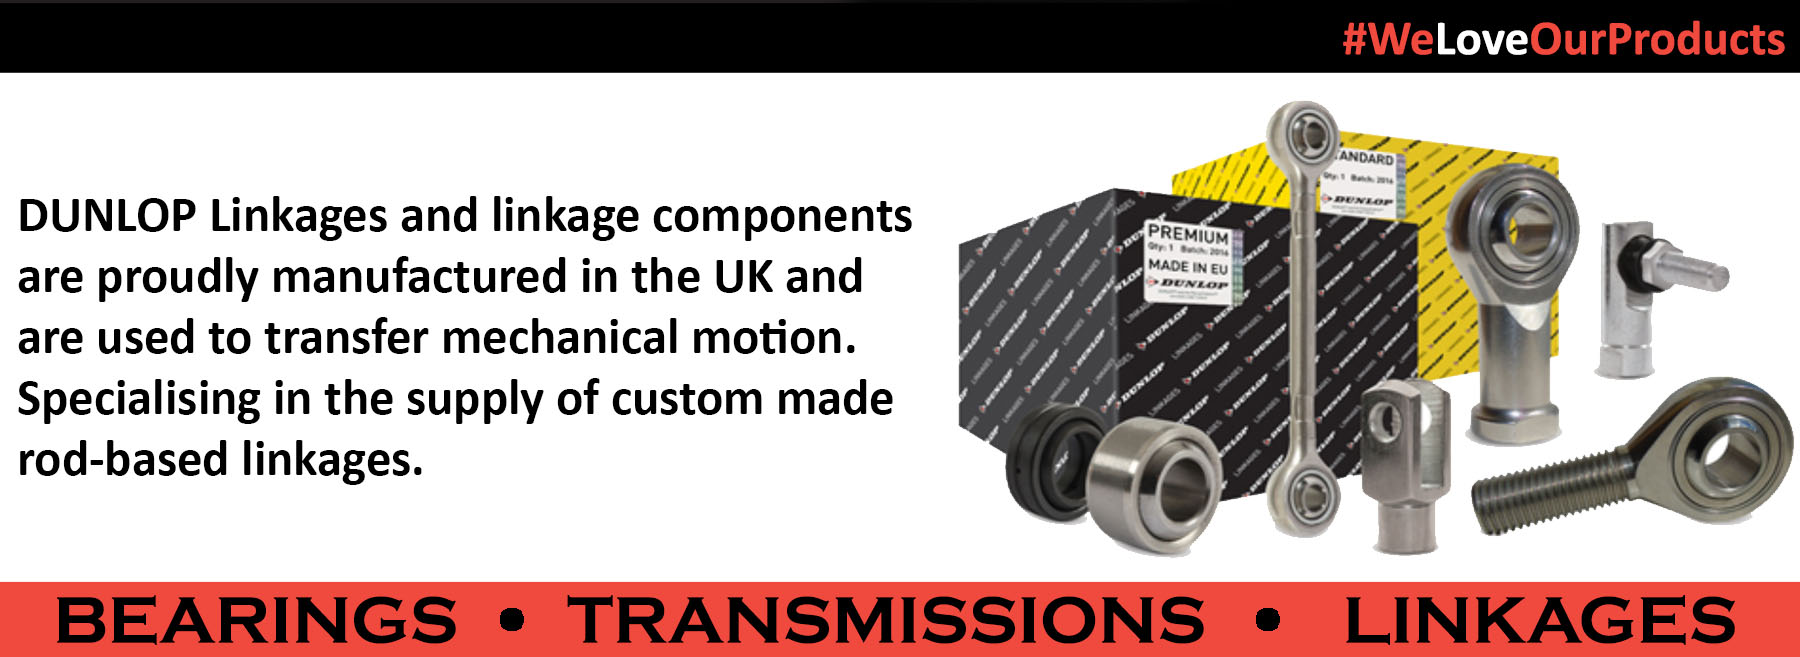 Dunlop Bearings, Transmission and Linkages